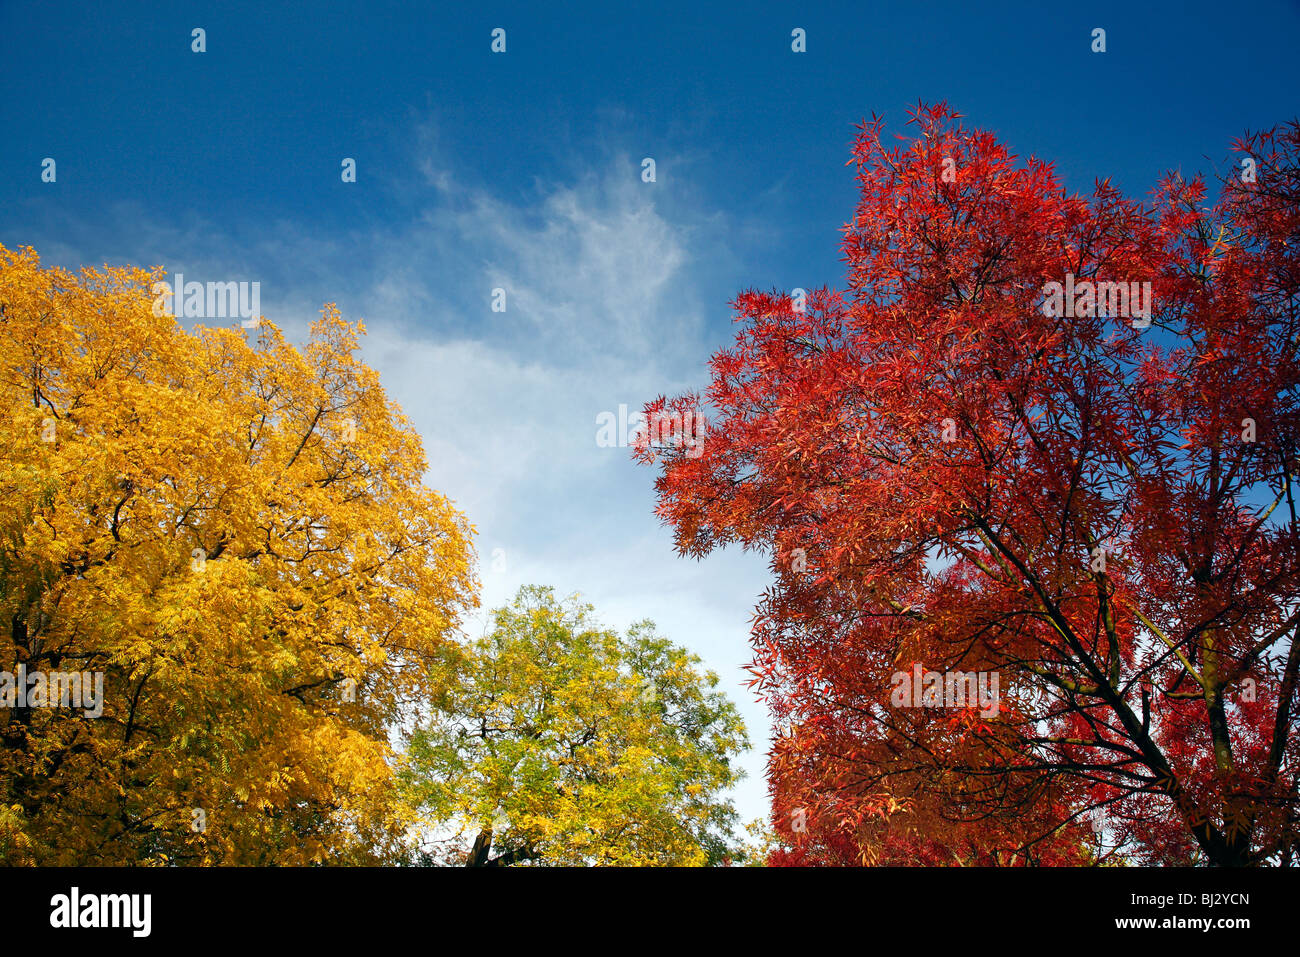 Trees in yellow and red autumn colors Stock Photo